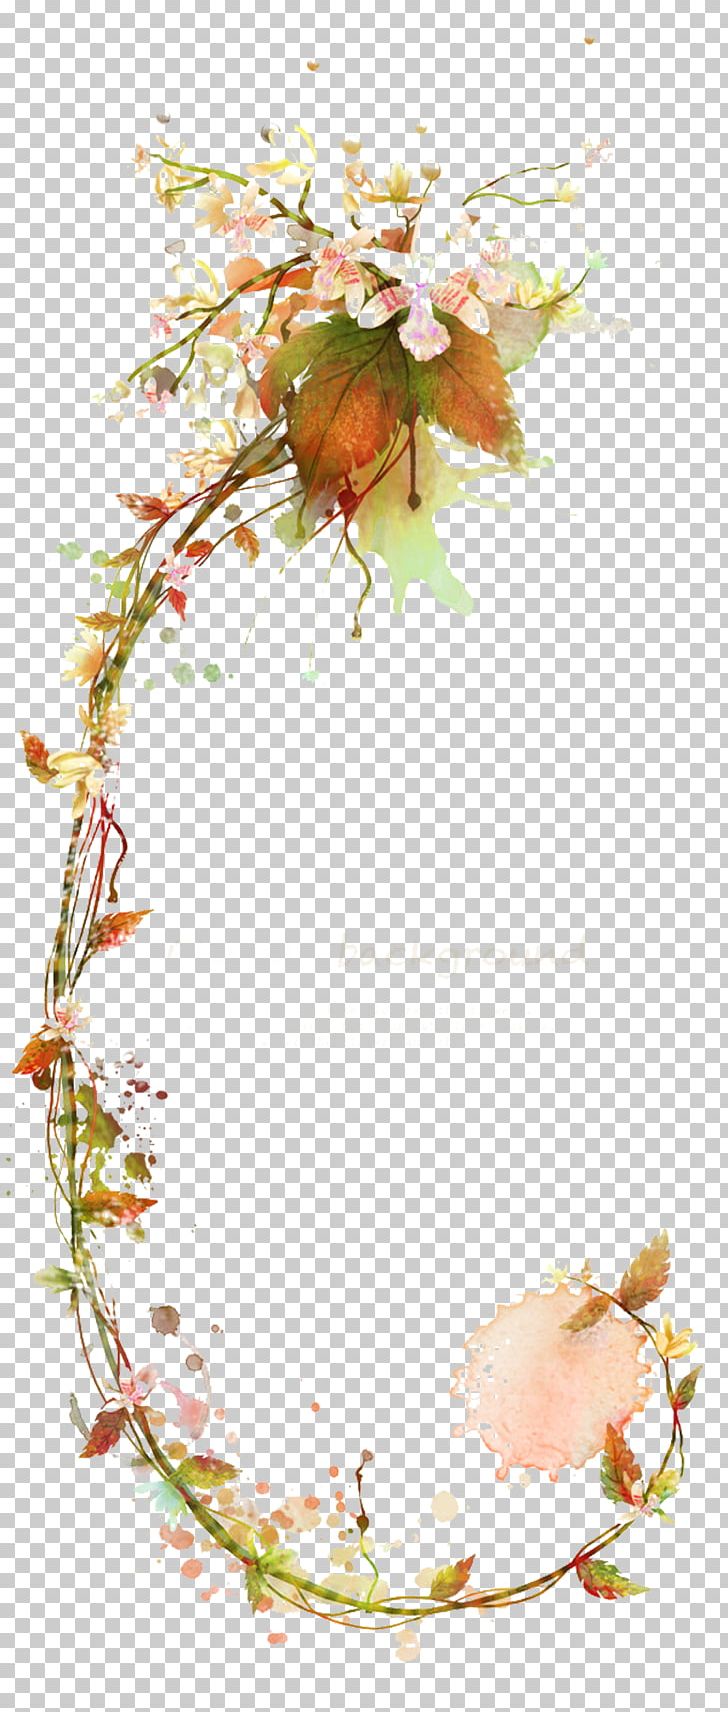 Flower Vine Illustration PNG, Clipart, Branch, Branches, Christmas Tree, Decor, Download Free PNG Download